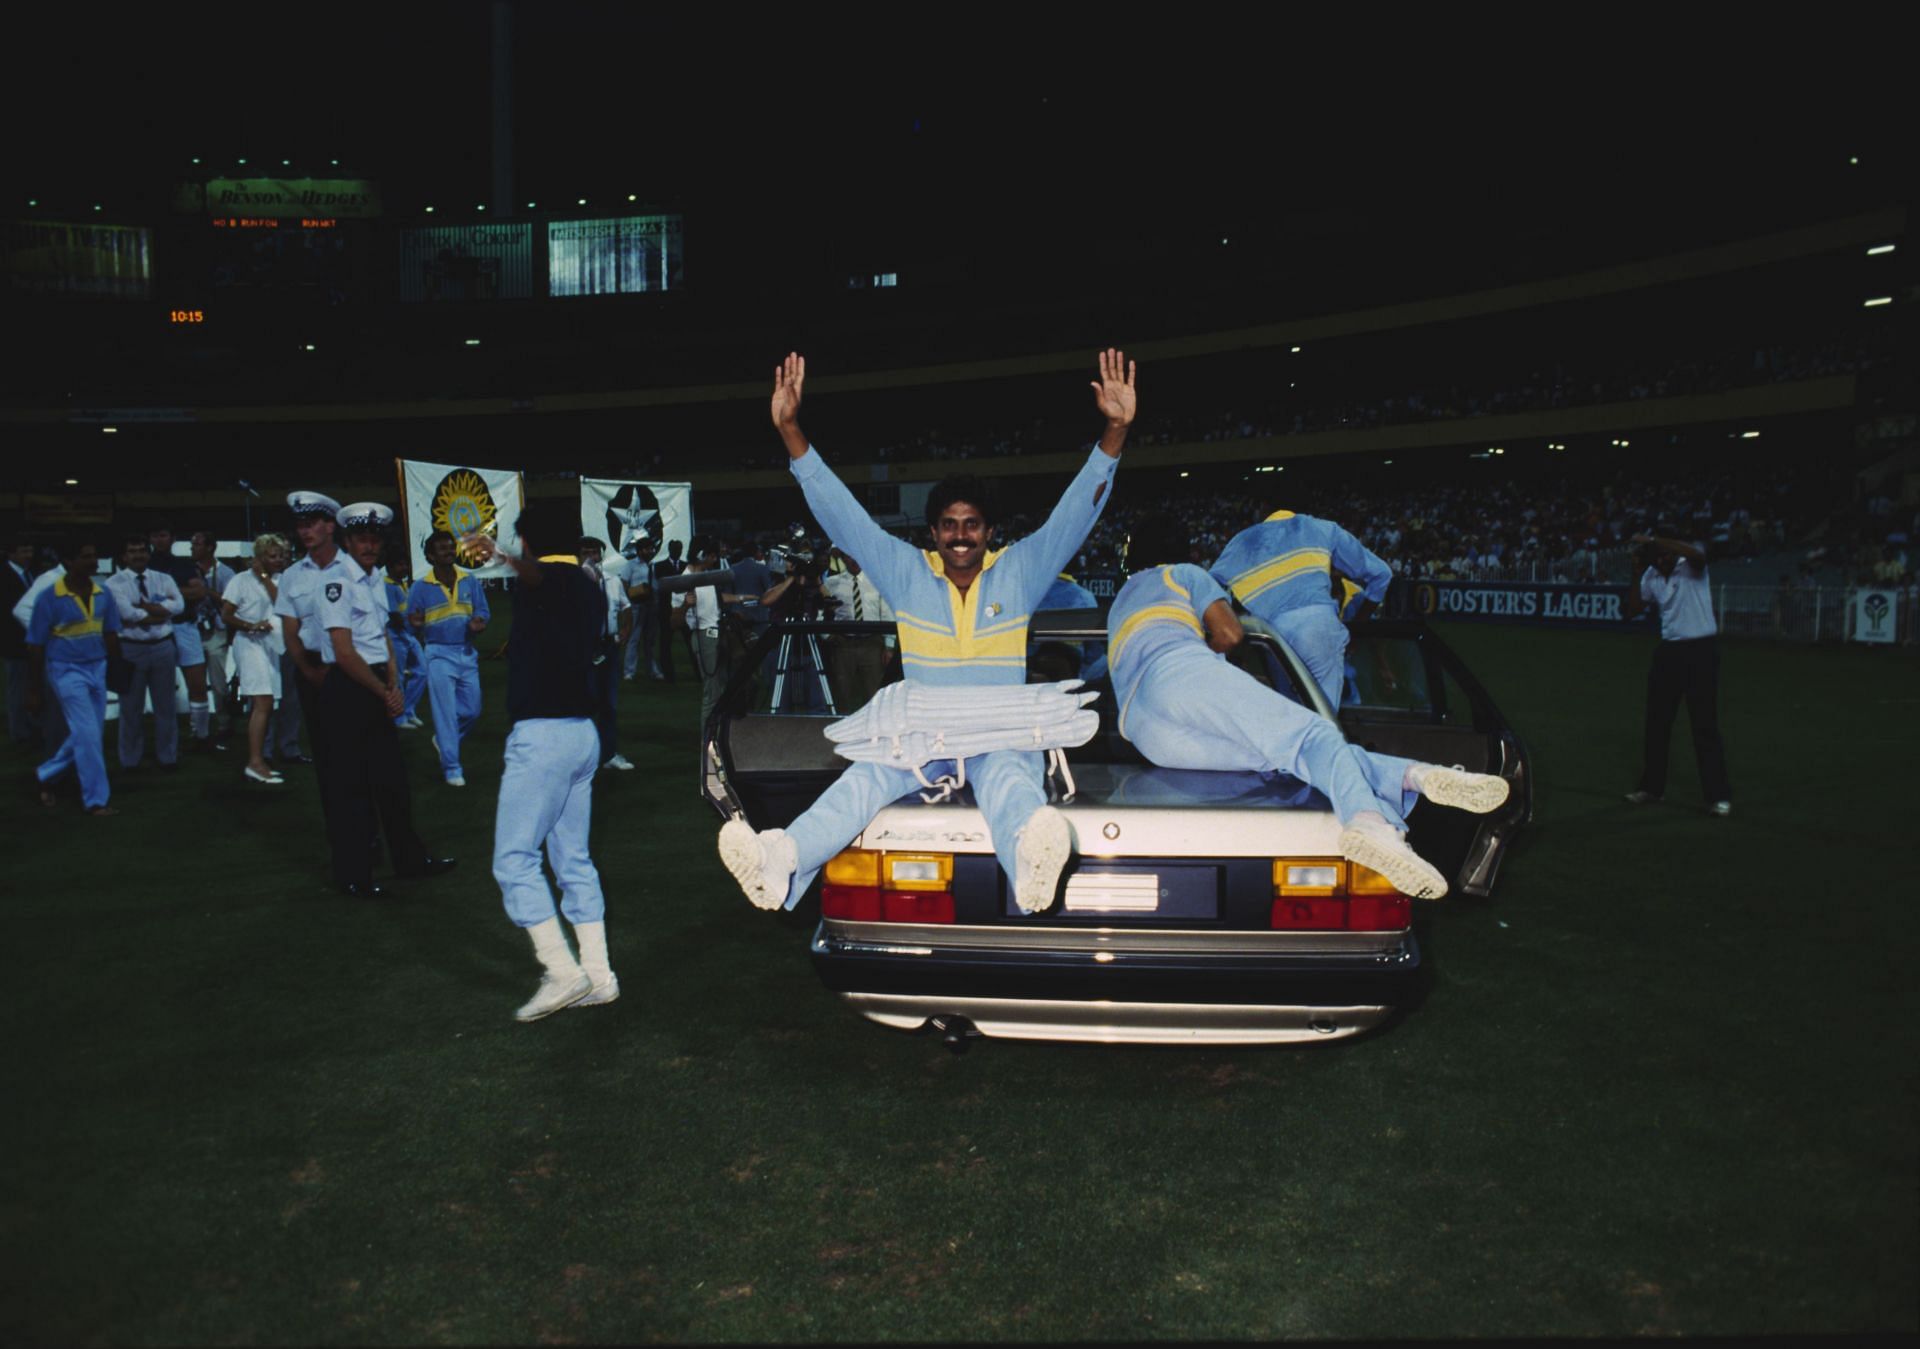 The Indian team won the 1985 World Championship of Cricket by defeating Pakistan in the final. (Pic: Getty Images)